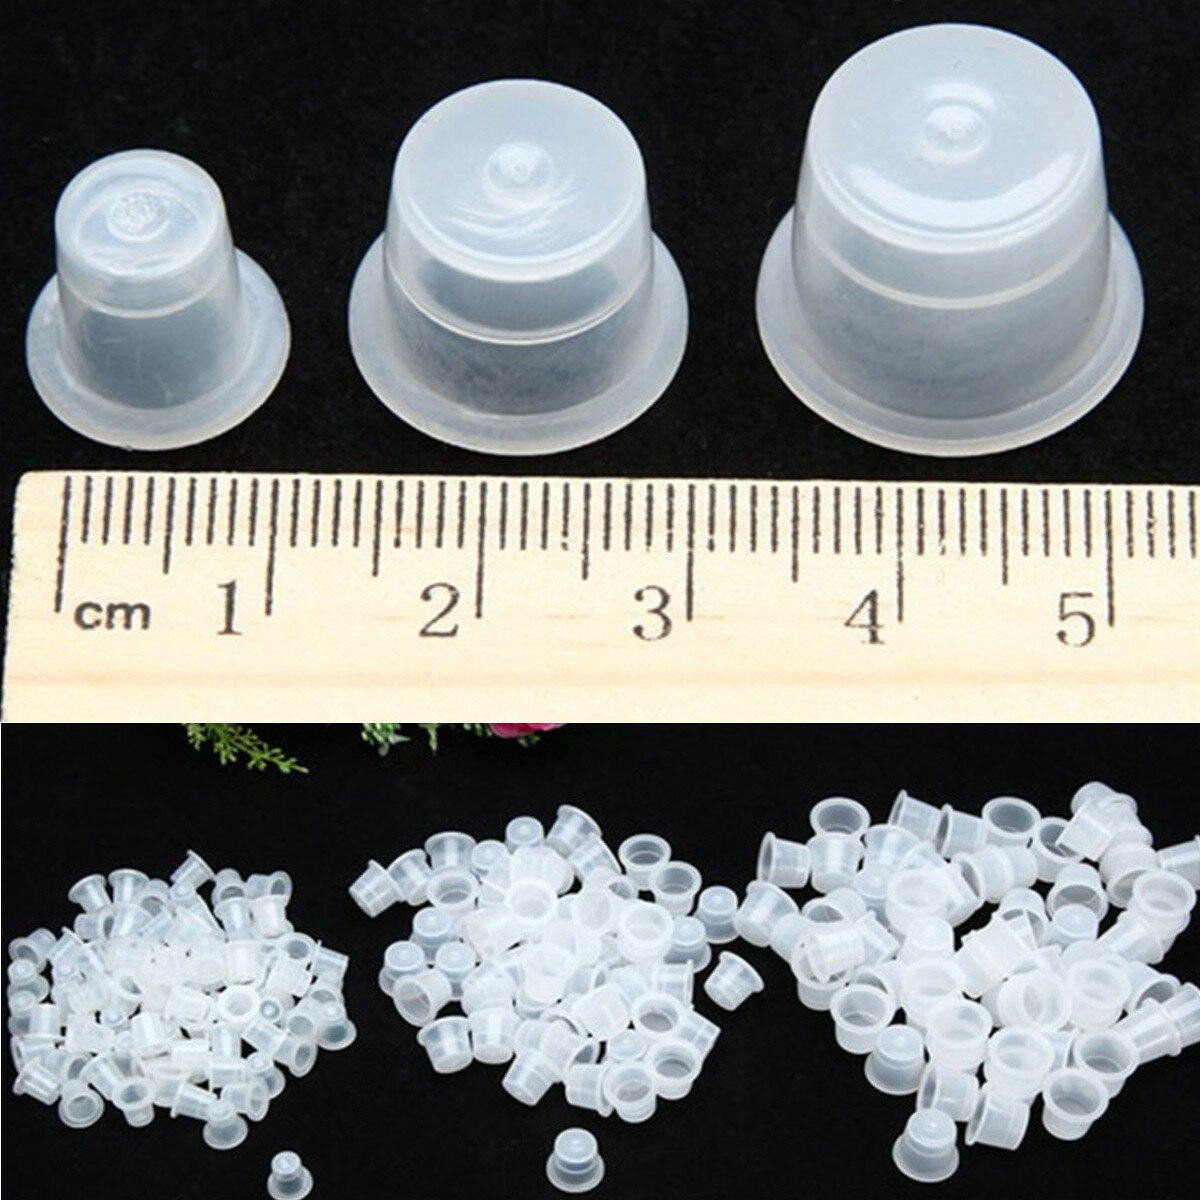 100pcs Plastic Tattoo Ink Cups Caps Holders Supplies 3 Size